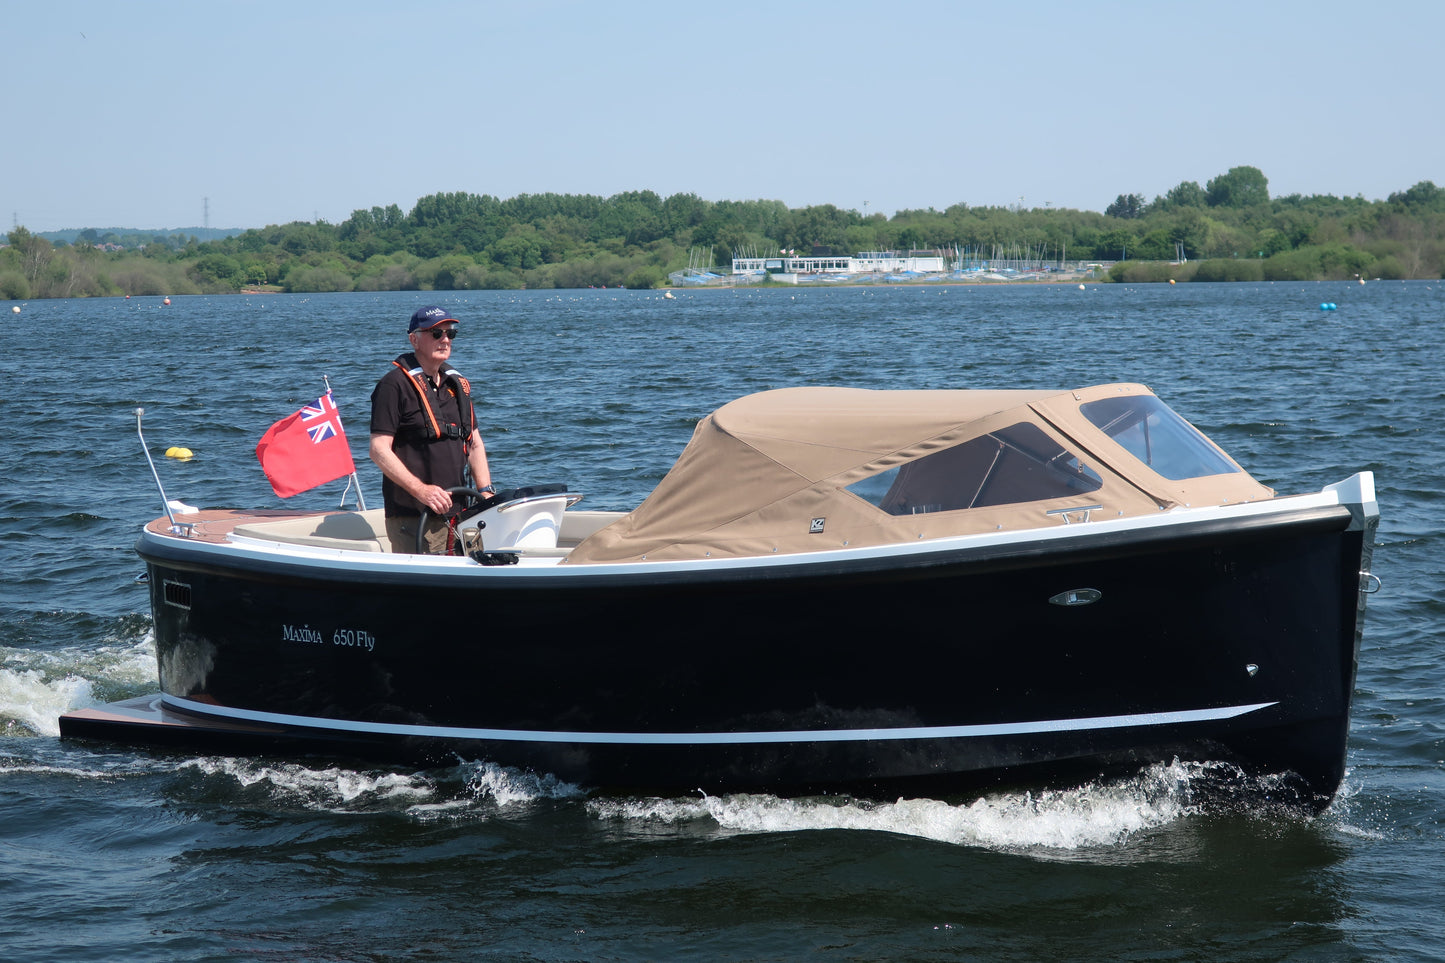 Maxima 650 Flying Lounge Powered by Honda BF100 VTEC 100hp In Stock Now